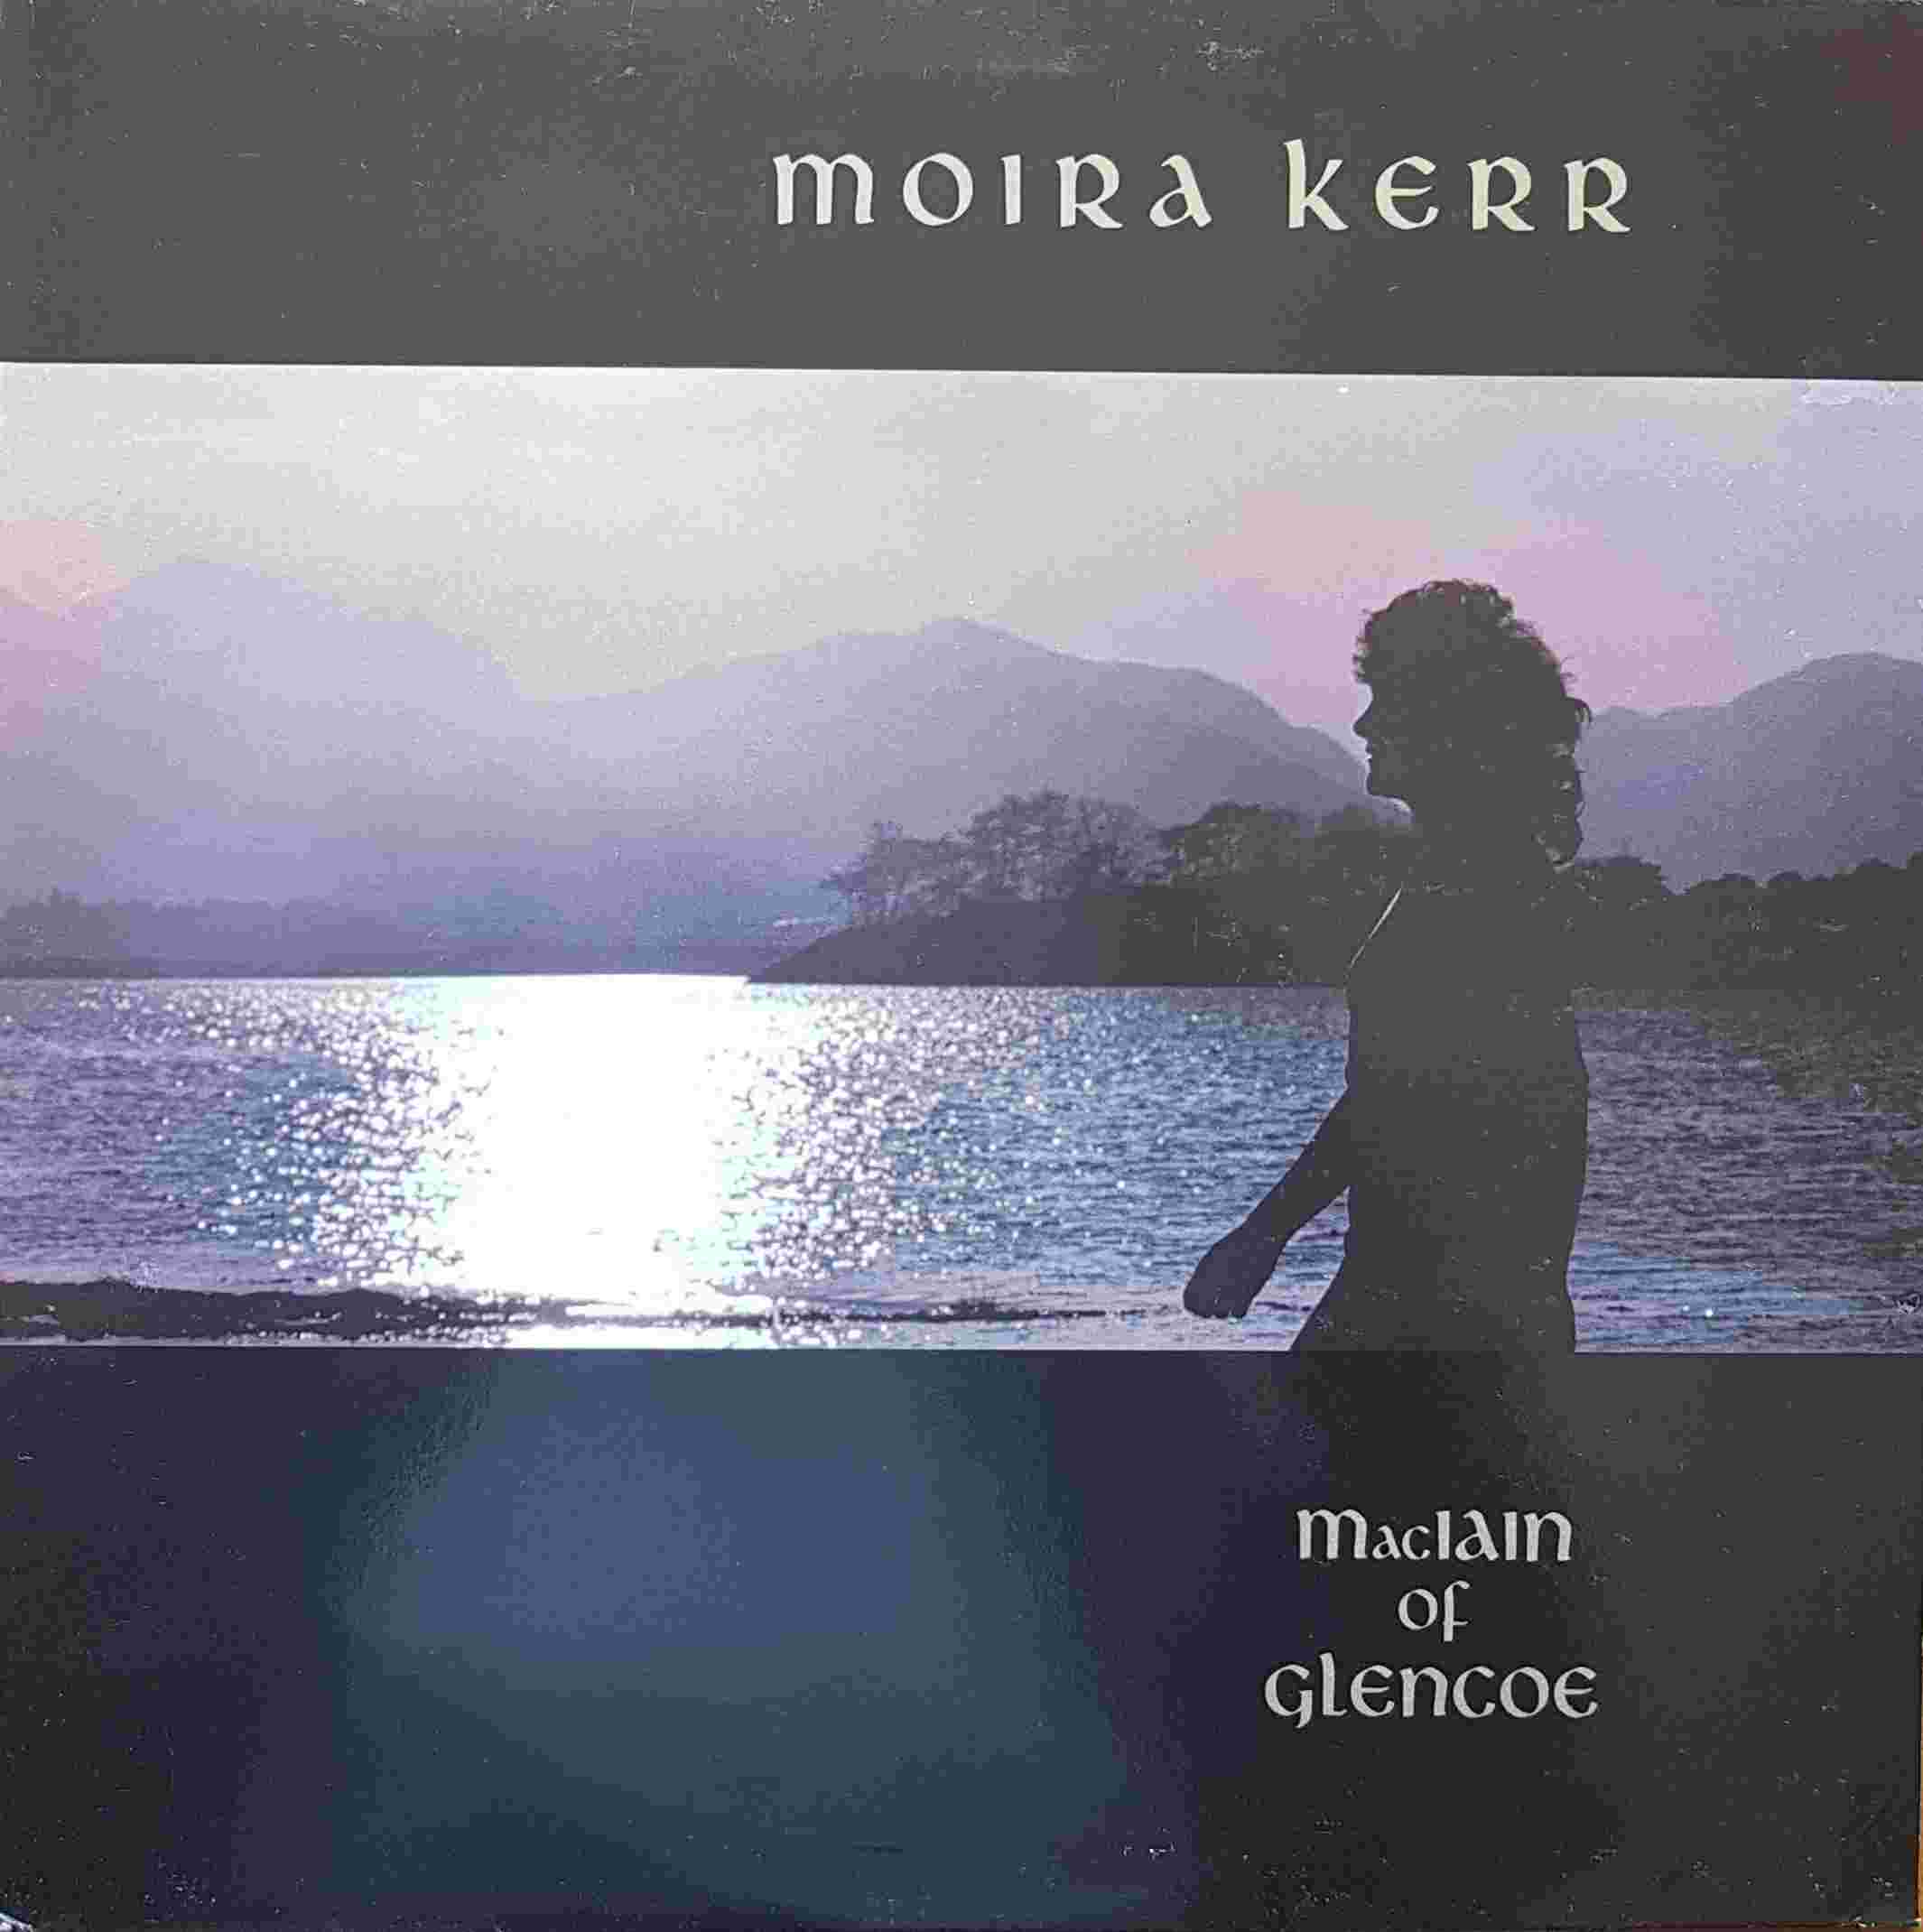 Picture of REN 734 Maclain of Glencoe album by artist Moira Kerr from the BBC records and Tapes library